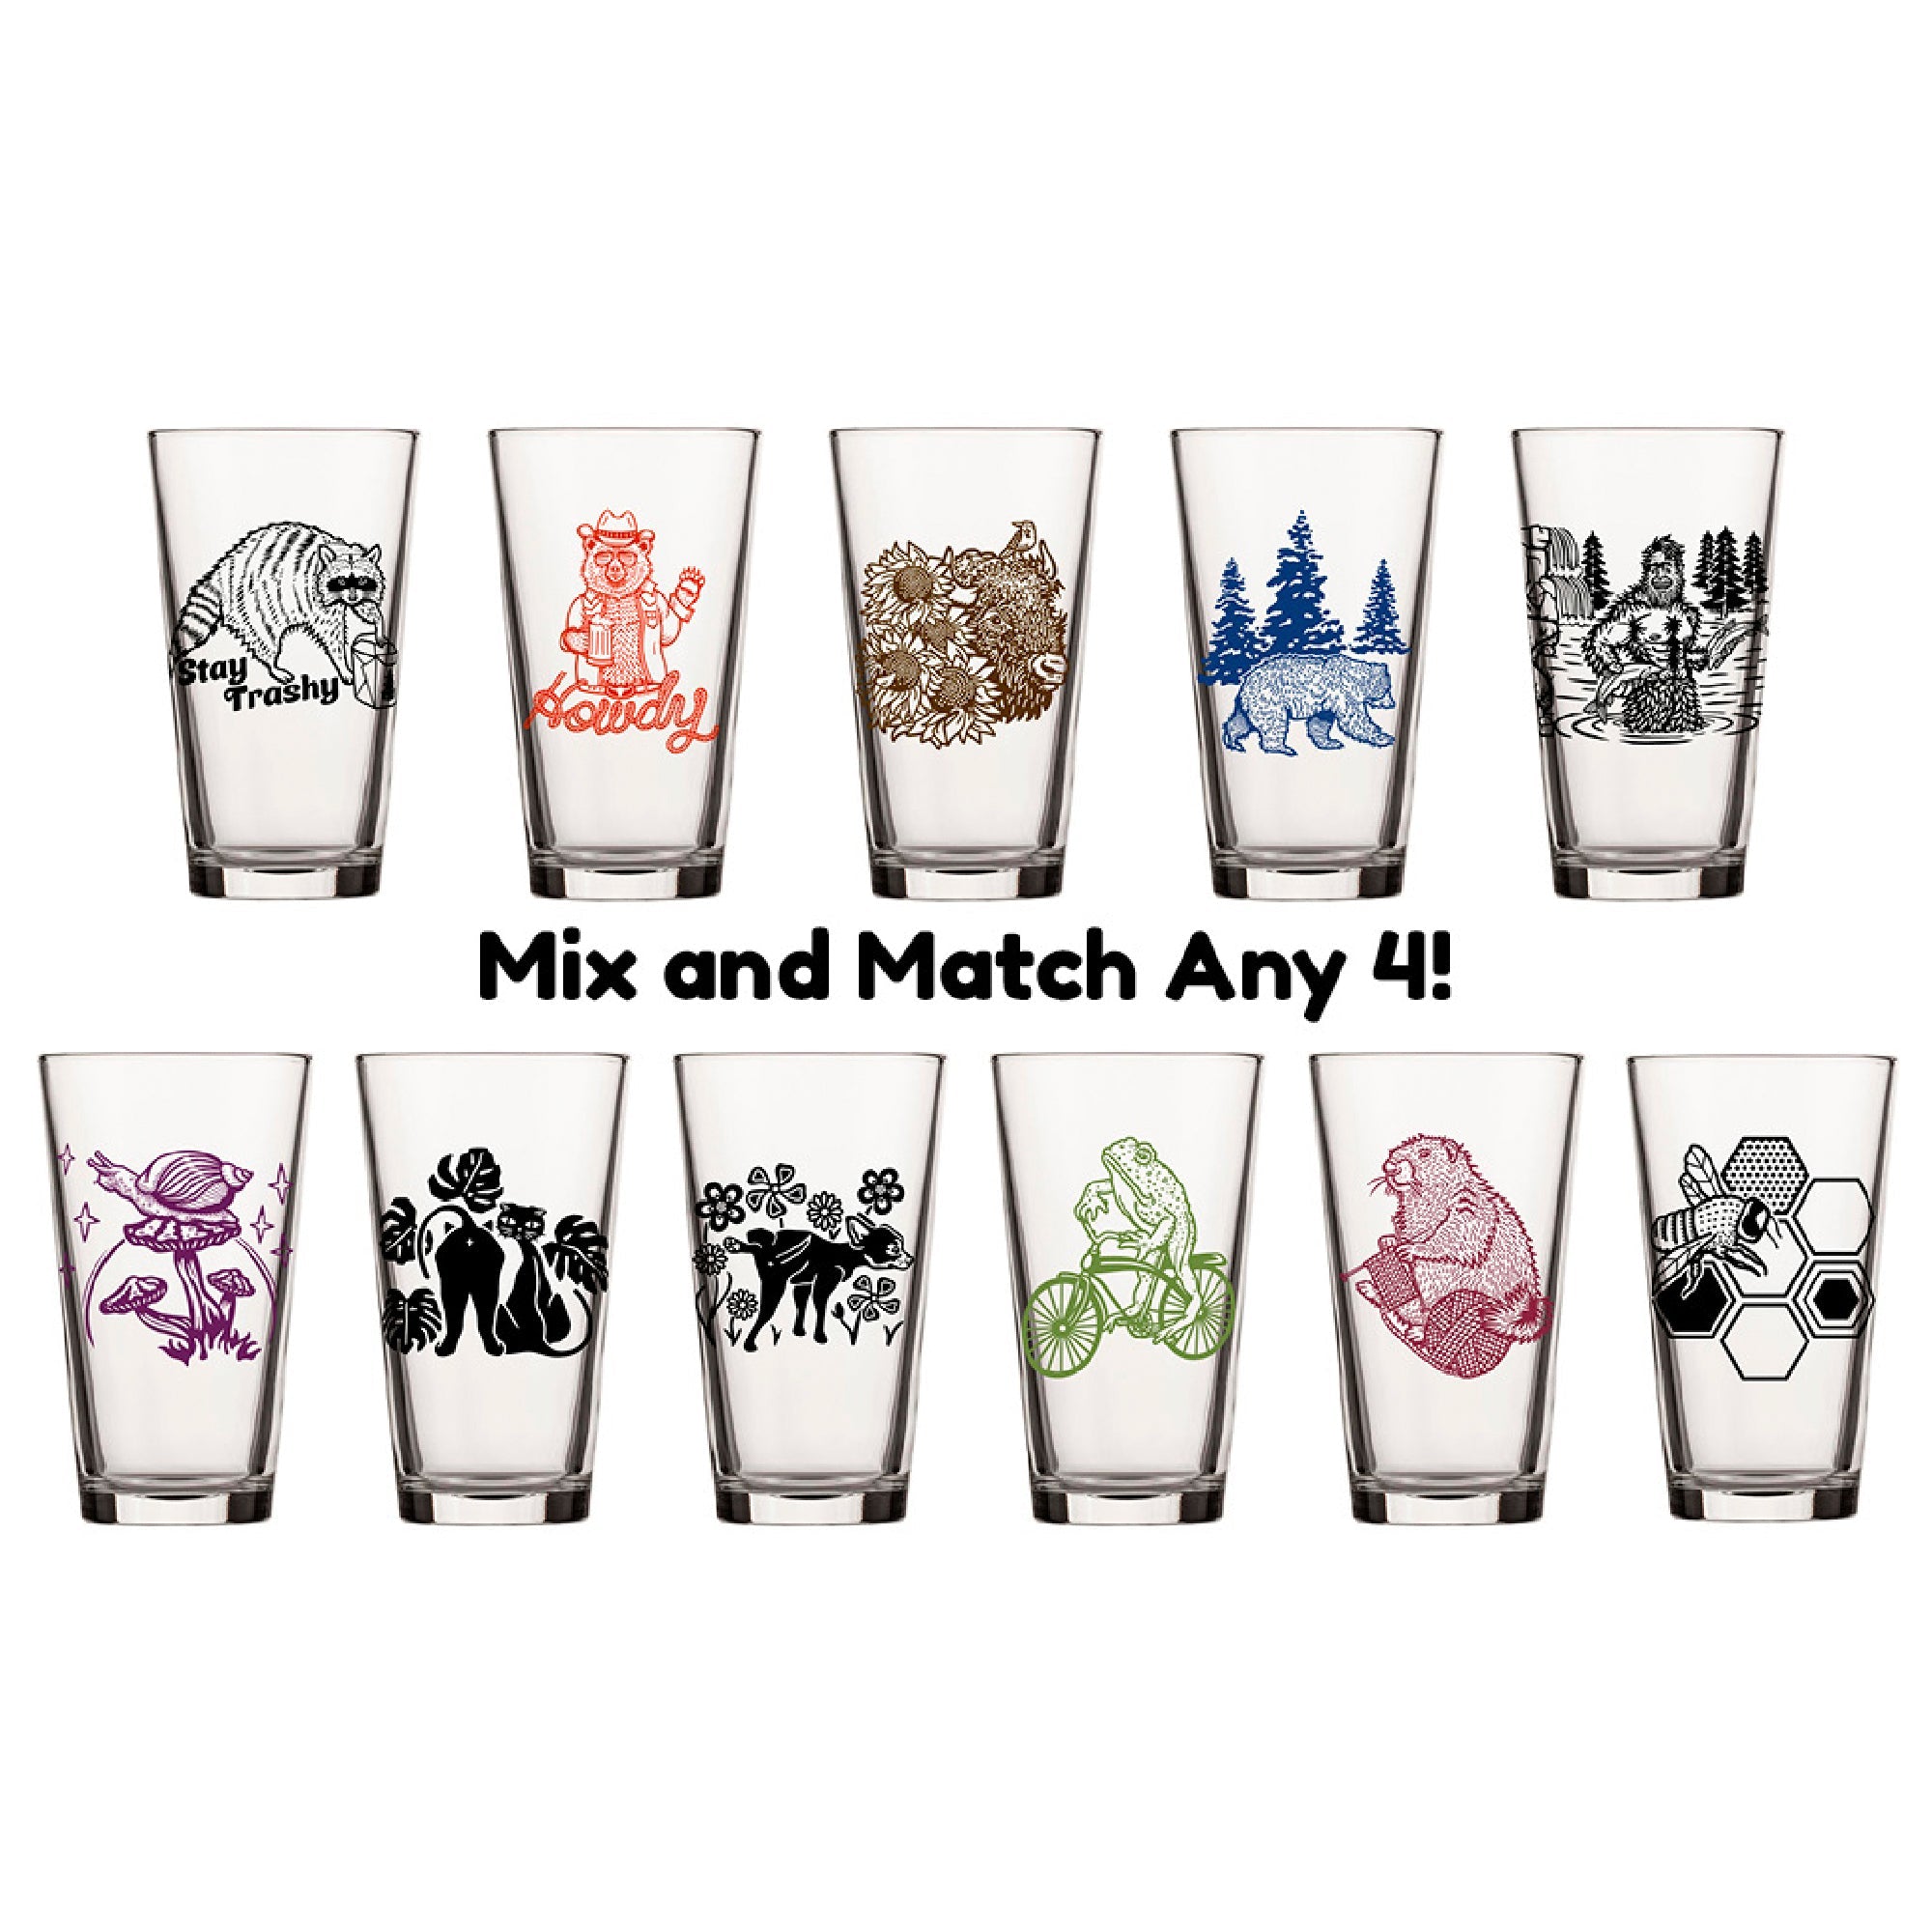 Pint Glass Sets | Mix and Match any 4 Beer Glasses